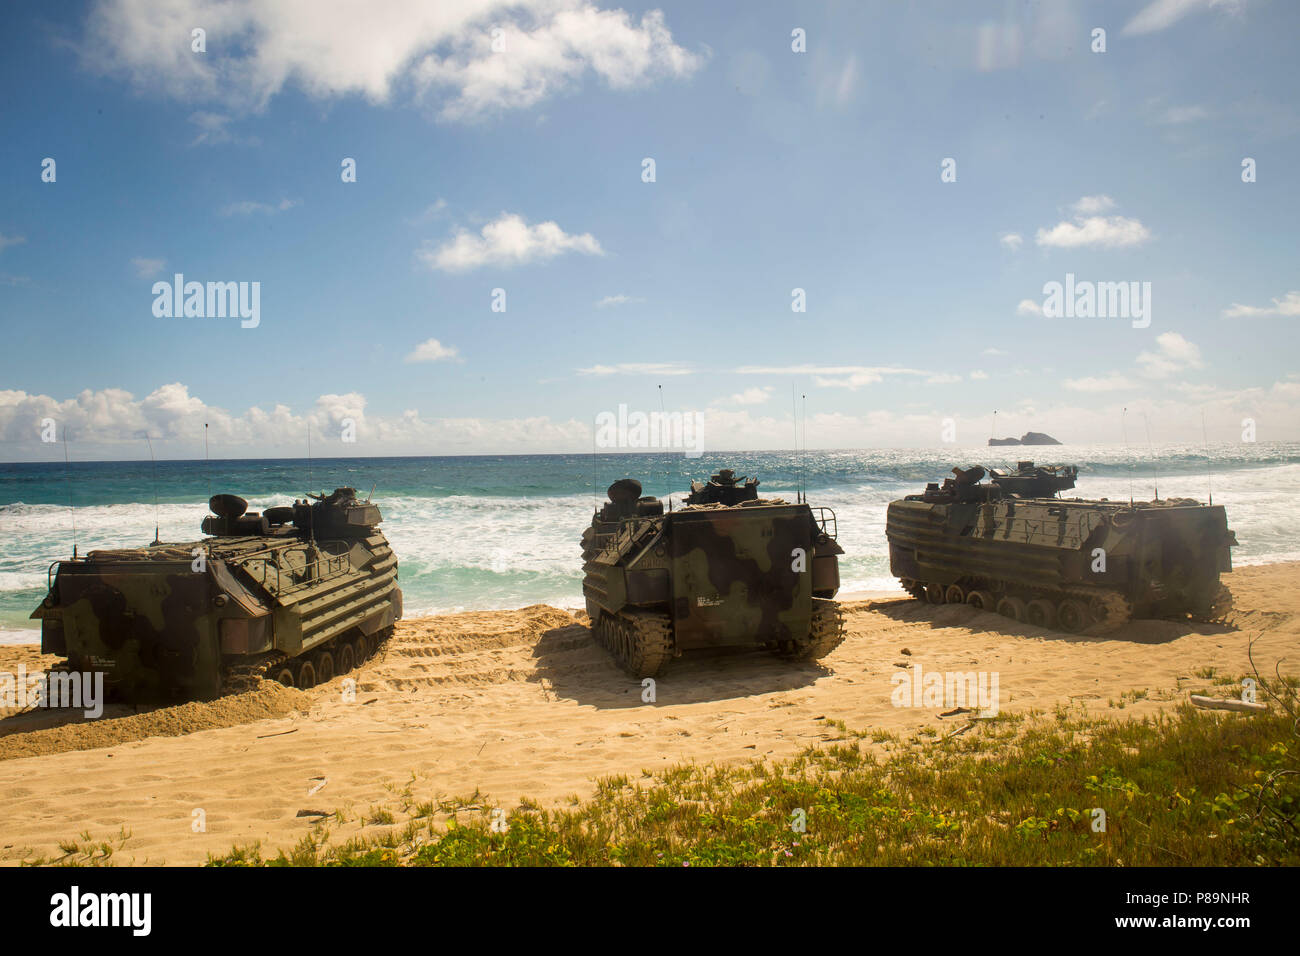 180708-M-ZO893-1004 MARINE CORPS BASE HAWAII (July 8, 2018) U.S. Marines with Combat Assault Company, 3rd Marine Regiment, in AAV-P7/A1 assault amphibious vehicles are staged in formation prior to splash training at Pyramid Rock Beach as part of Rim of the Pacific (RIMPAC) exercise on Marine Corps Base Hawaii July 8, 2018. RIMPAC provides high-value training for task-organized, highly capable Marine-Air Ground Task Force and enhances the critical crisis response capability of U.S. Marines in the Pacific. Twenty-five nations, 46 ships, five submarines, about 200 aircraft, and 25,000 personnel a Stock Photo